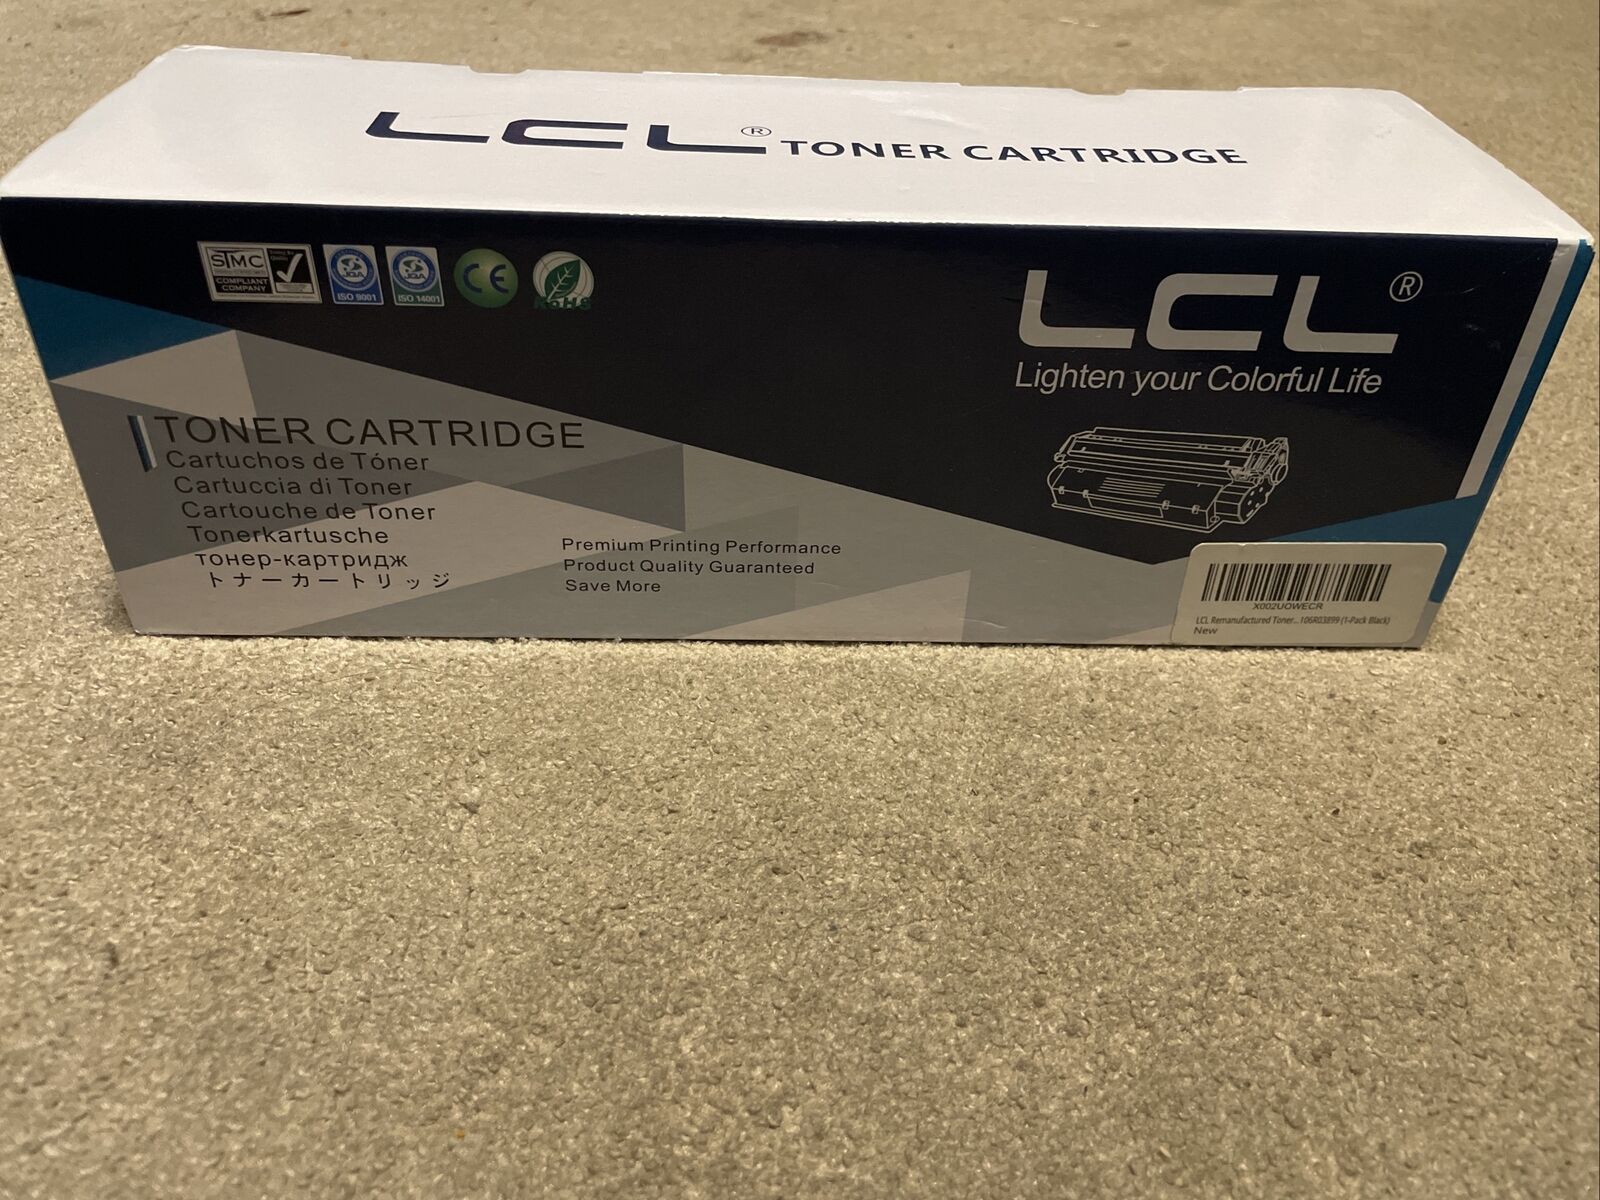 LCL-C605/106R03898 Toner Cartridge Yellow Lighten your Colorful Life ~NEW~